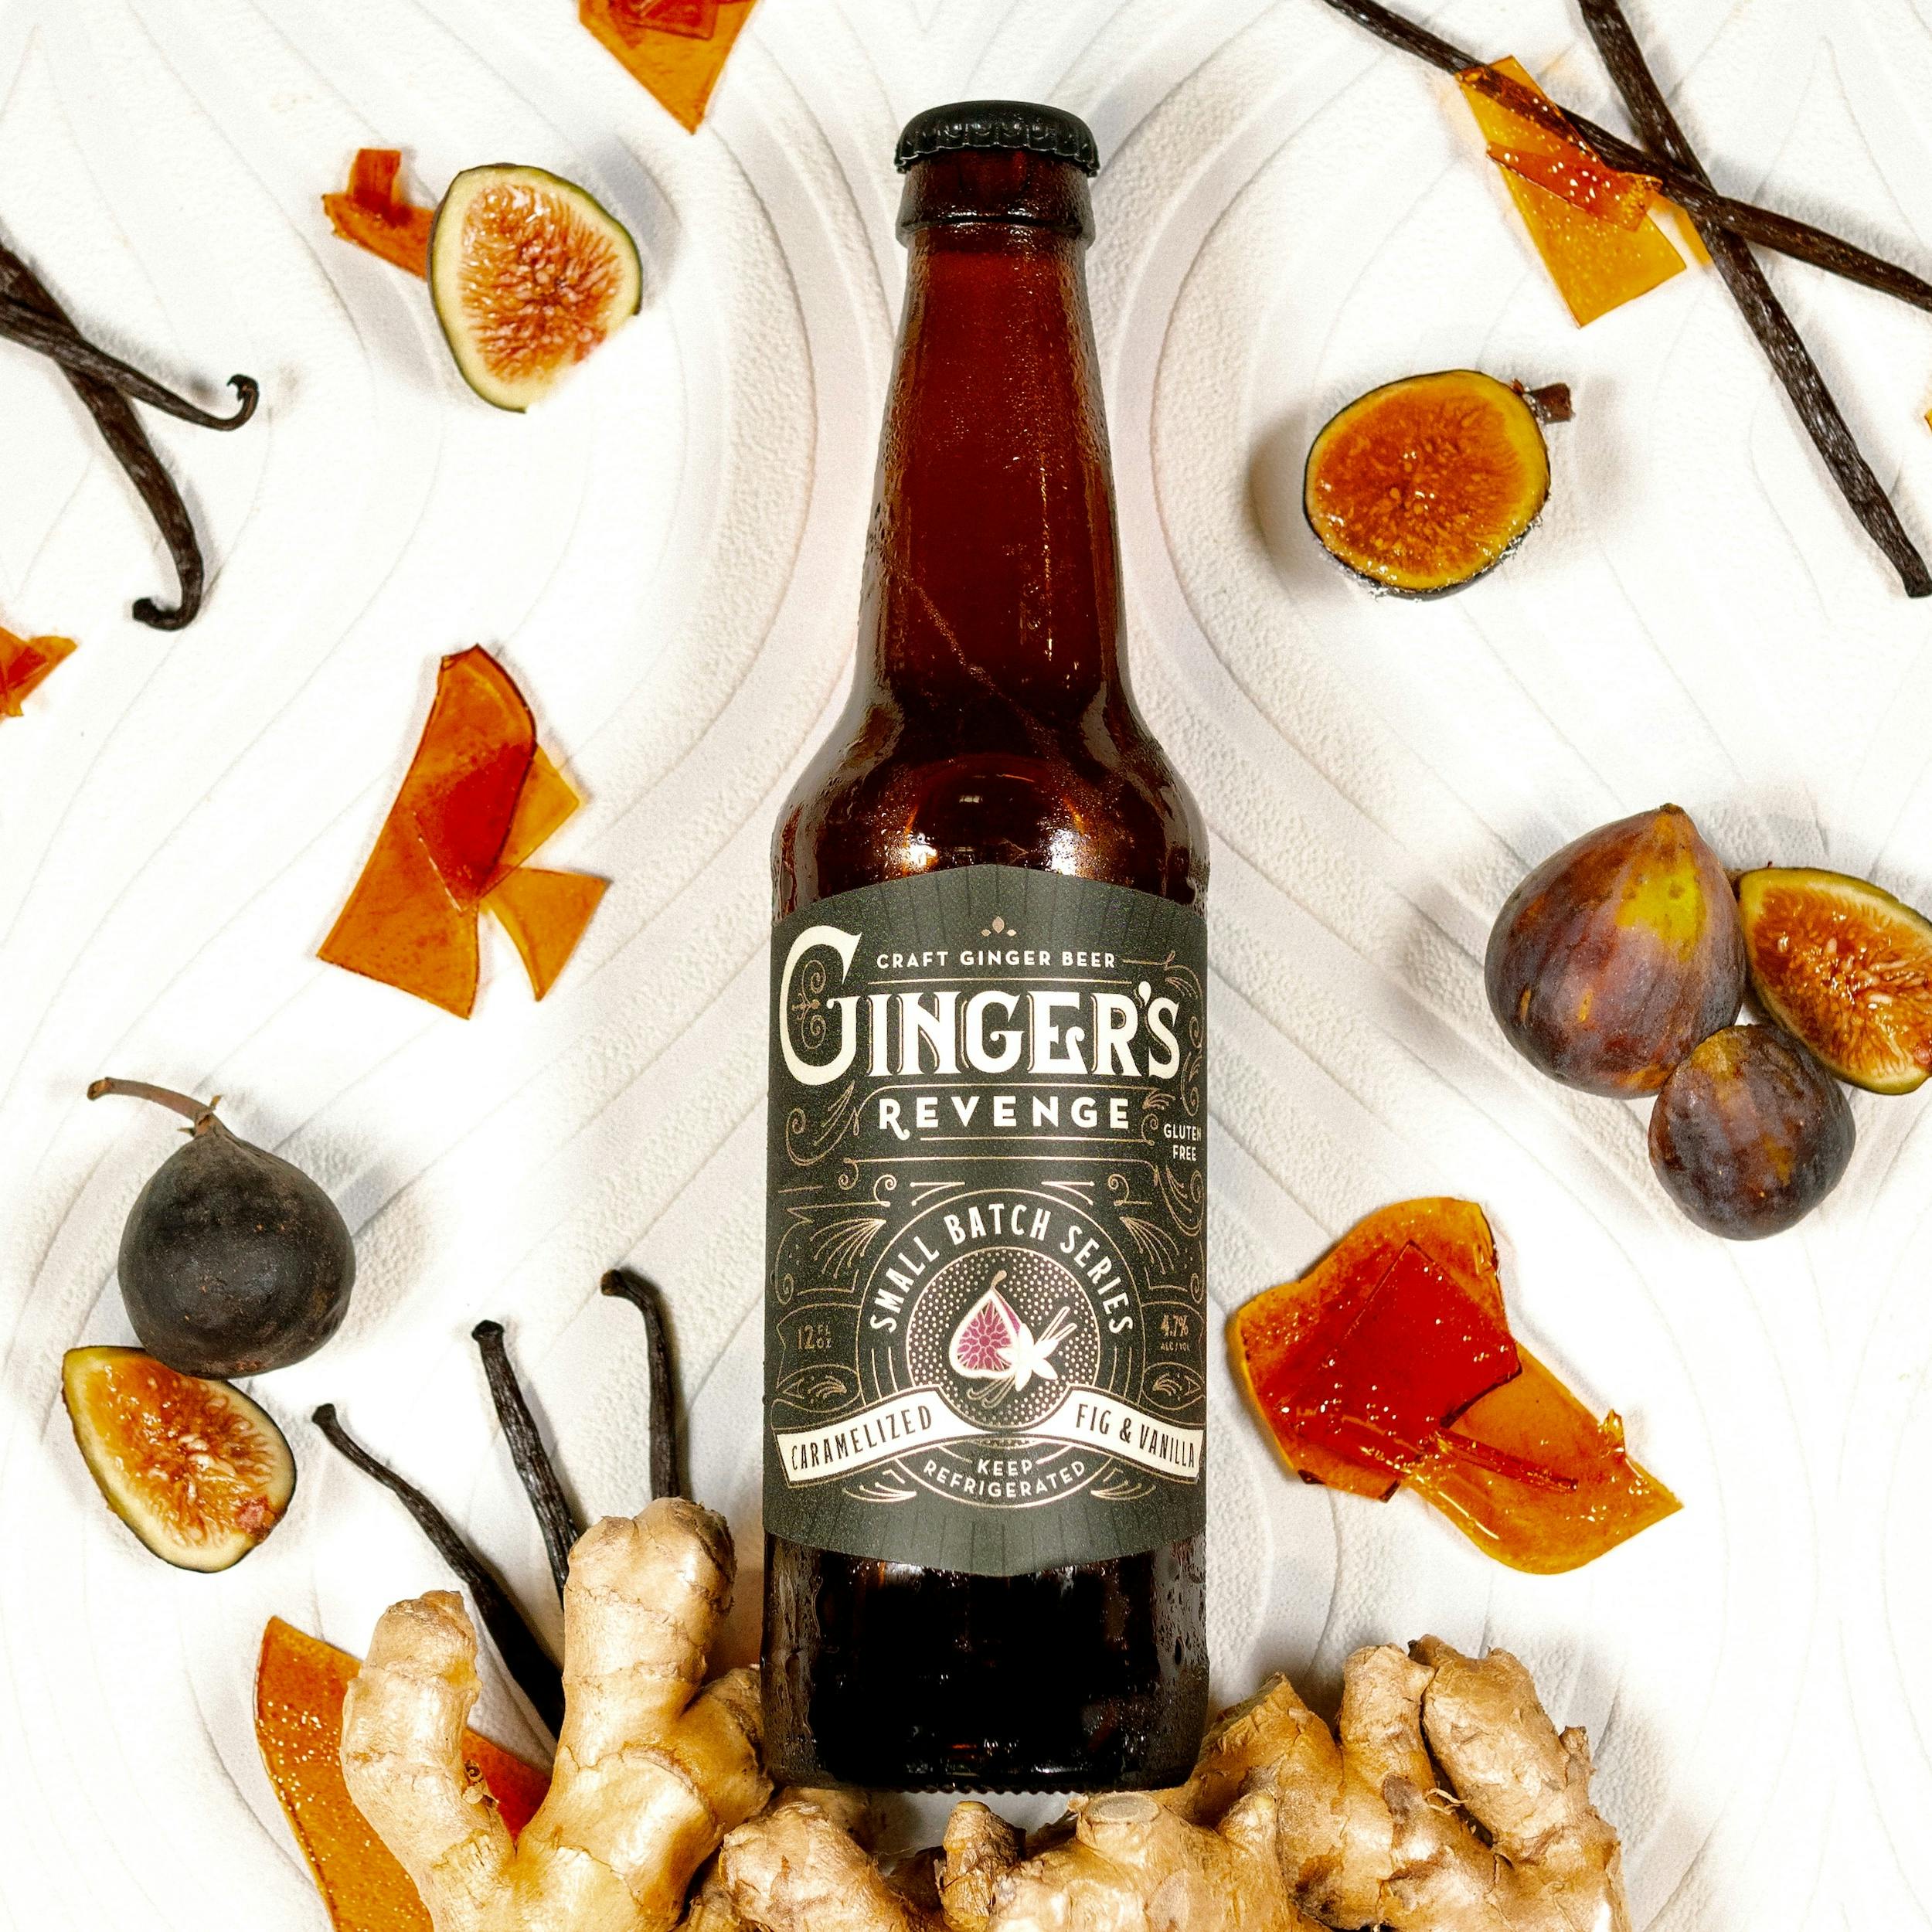 About Our Beer  Ginger's Revenge